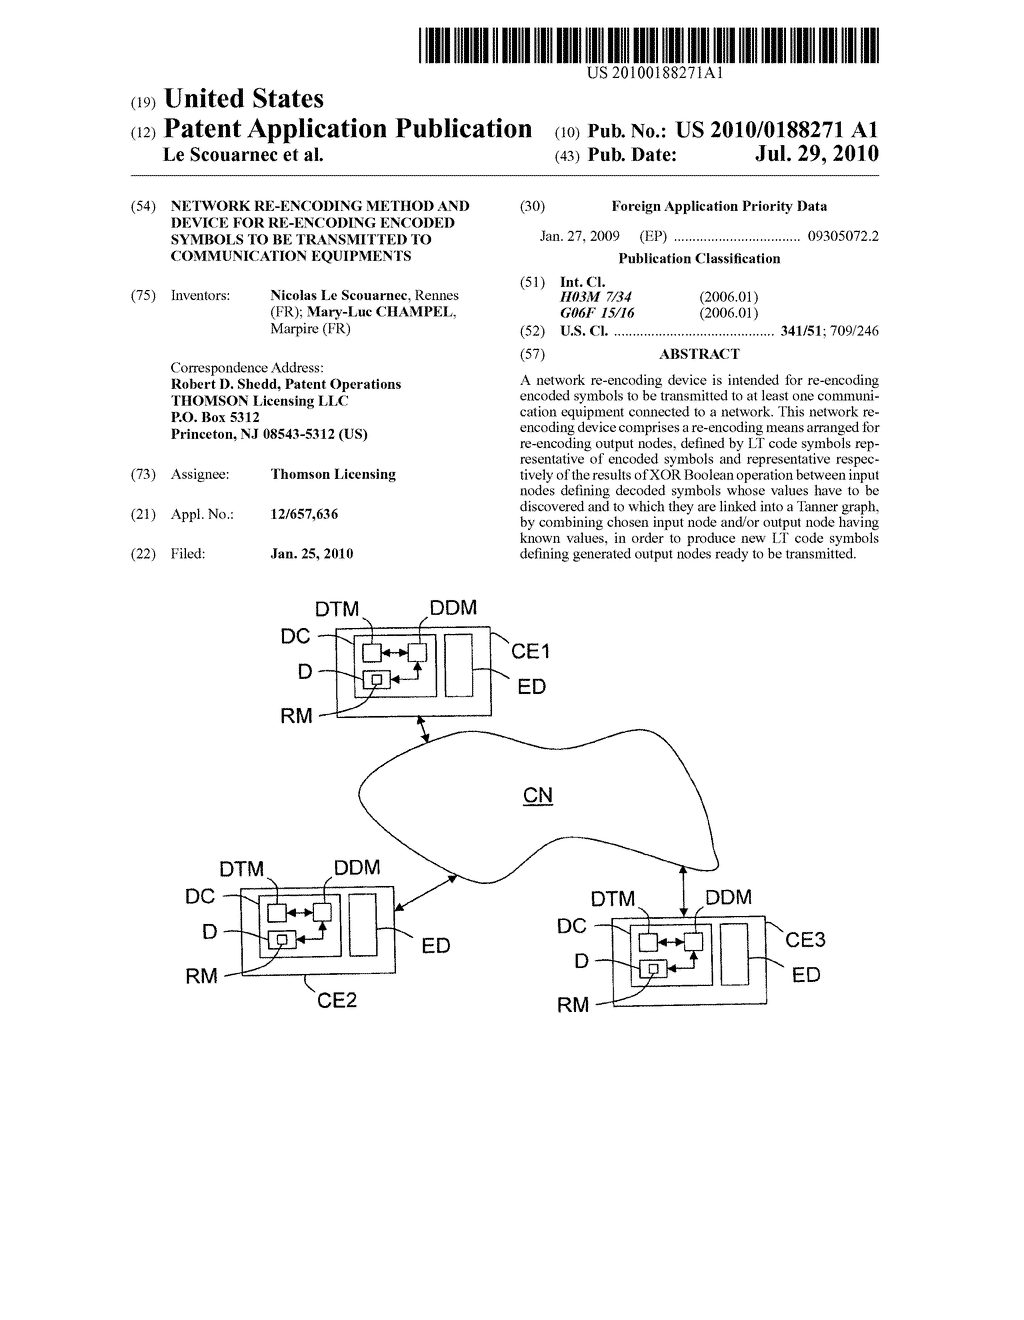 Network re-encoding method and device for re-encoding encoded symbols to be transmitted to communication equipments - diagram, schematic, and image 01